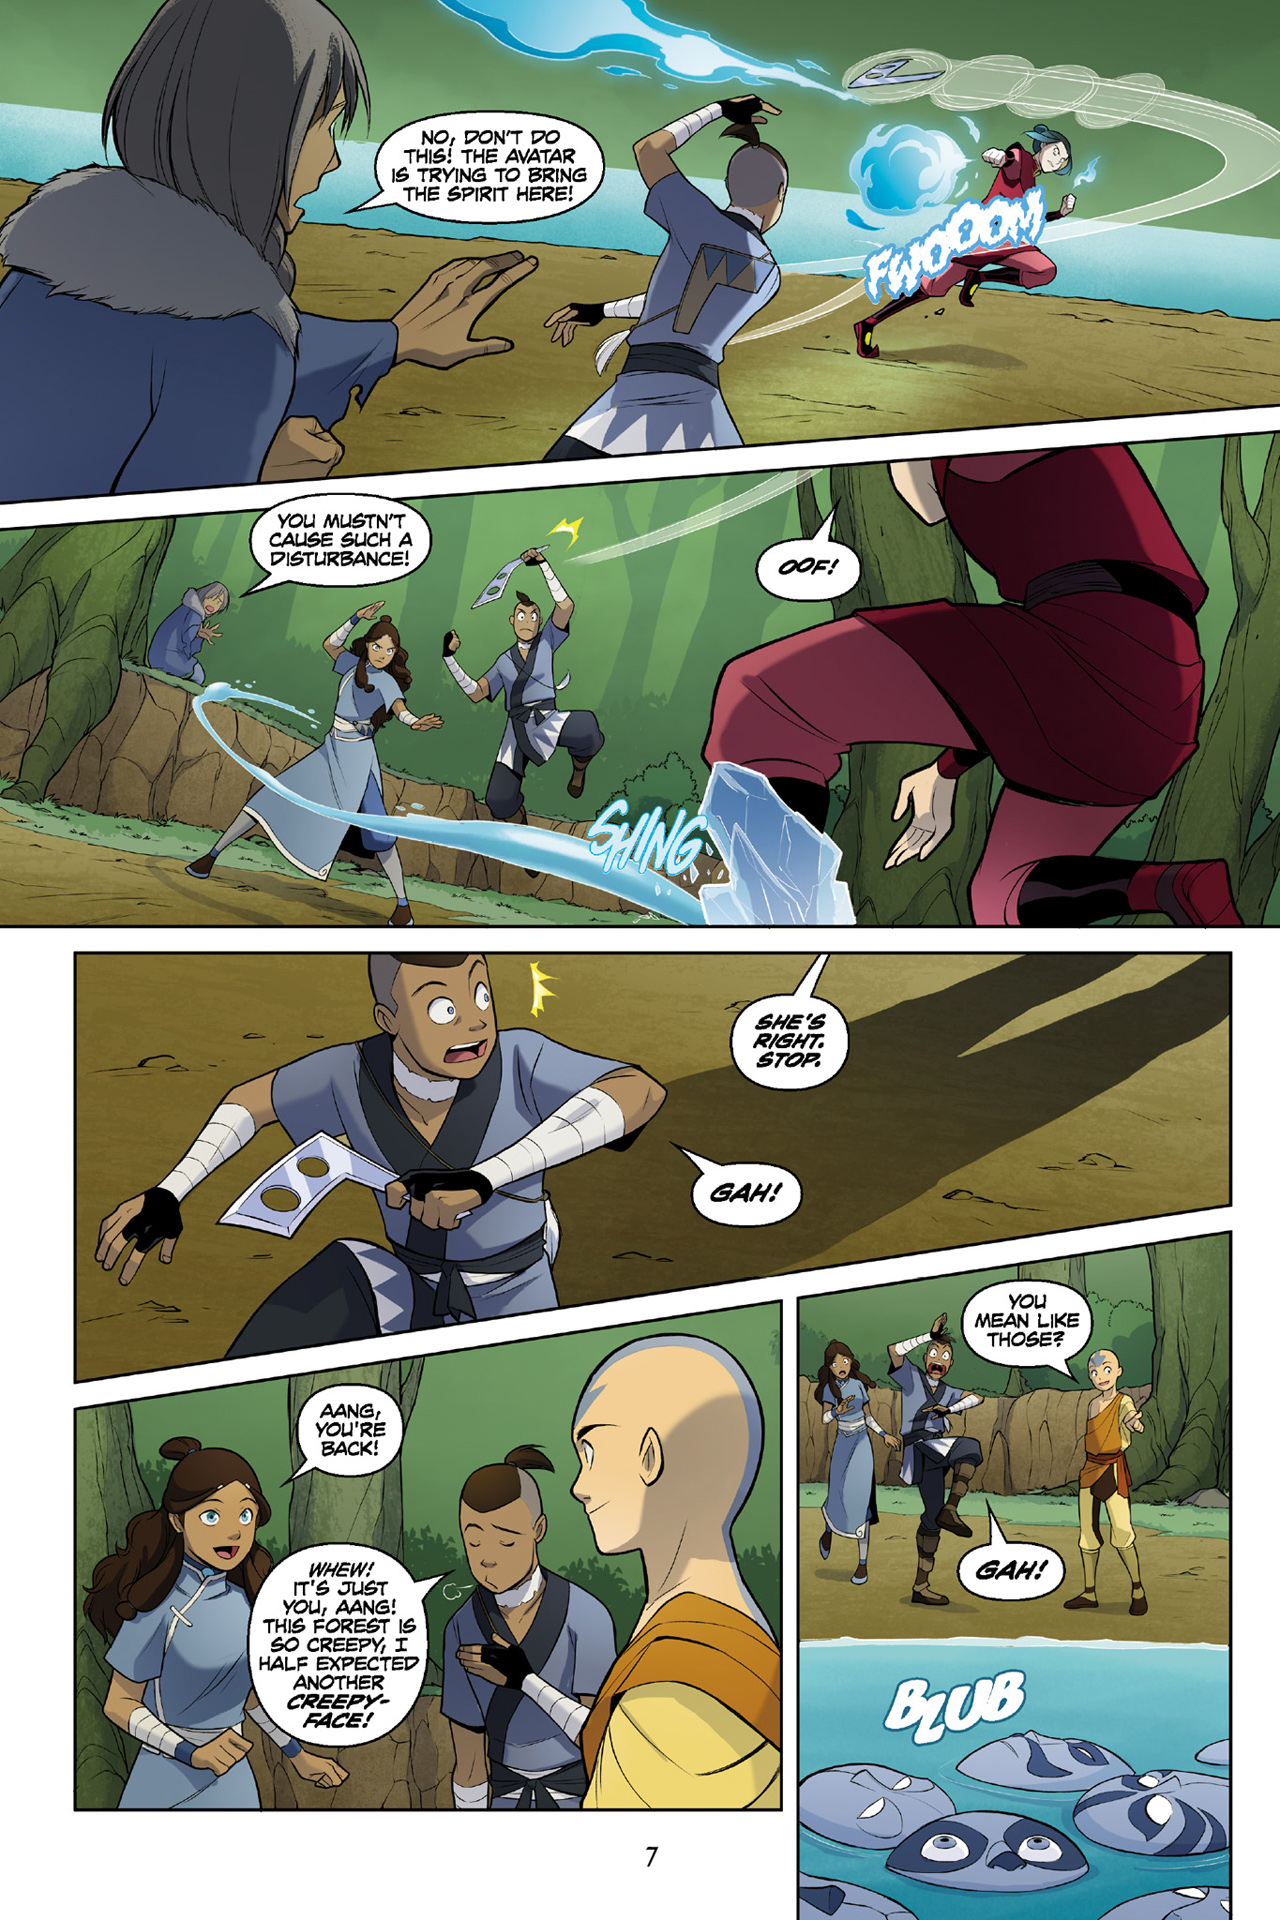 Read online Nickelodeon Avatar: The Last Airbender - The Search comic -  Issue # Part 3 - 8